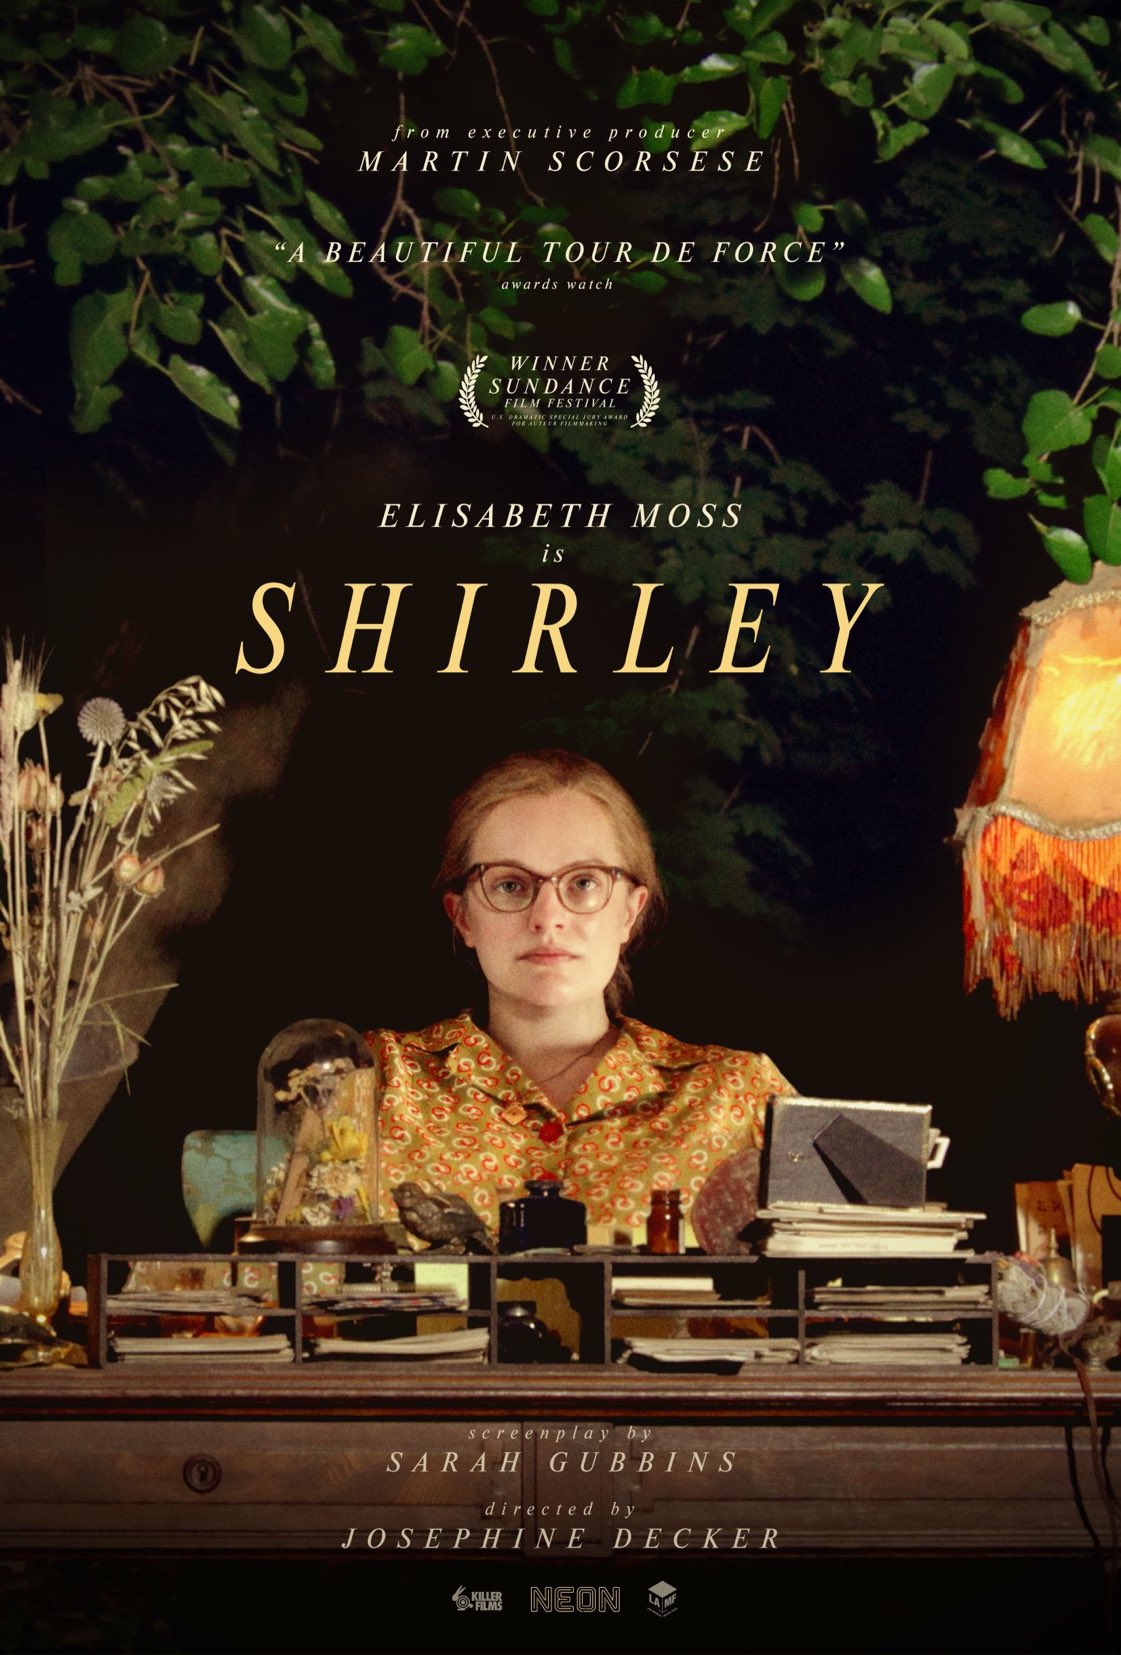 Poster for a film titled Shirley depicting the actress Elizabeth Moss sitting at her desk surrounded by plants, pill and alcohol bottles, typewriter and darkness.